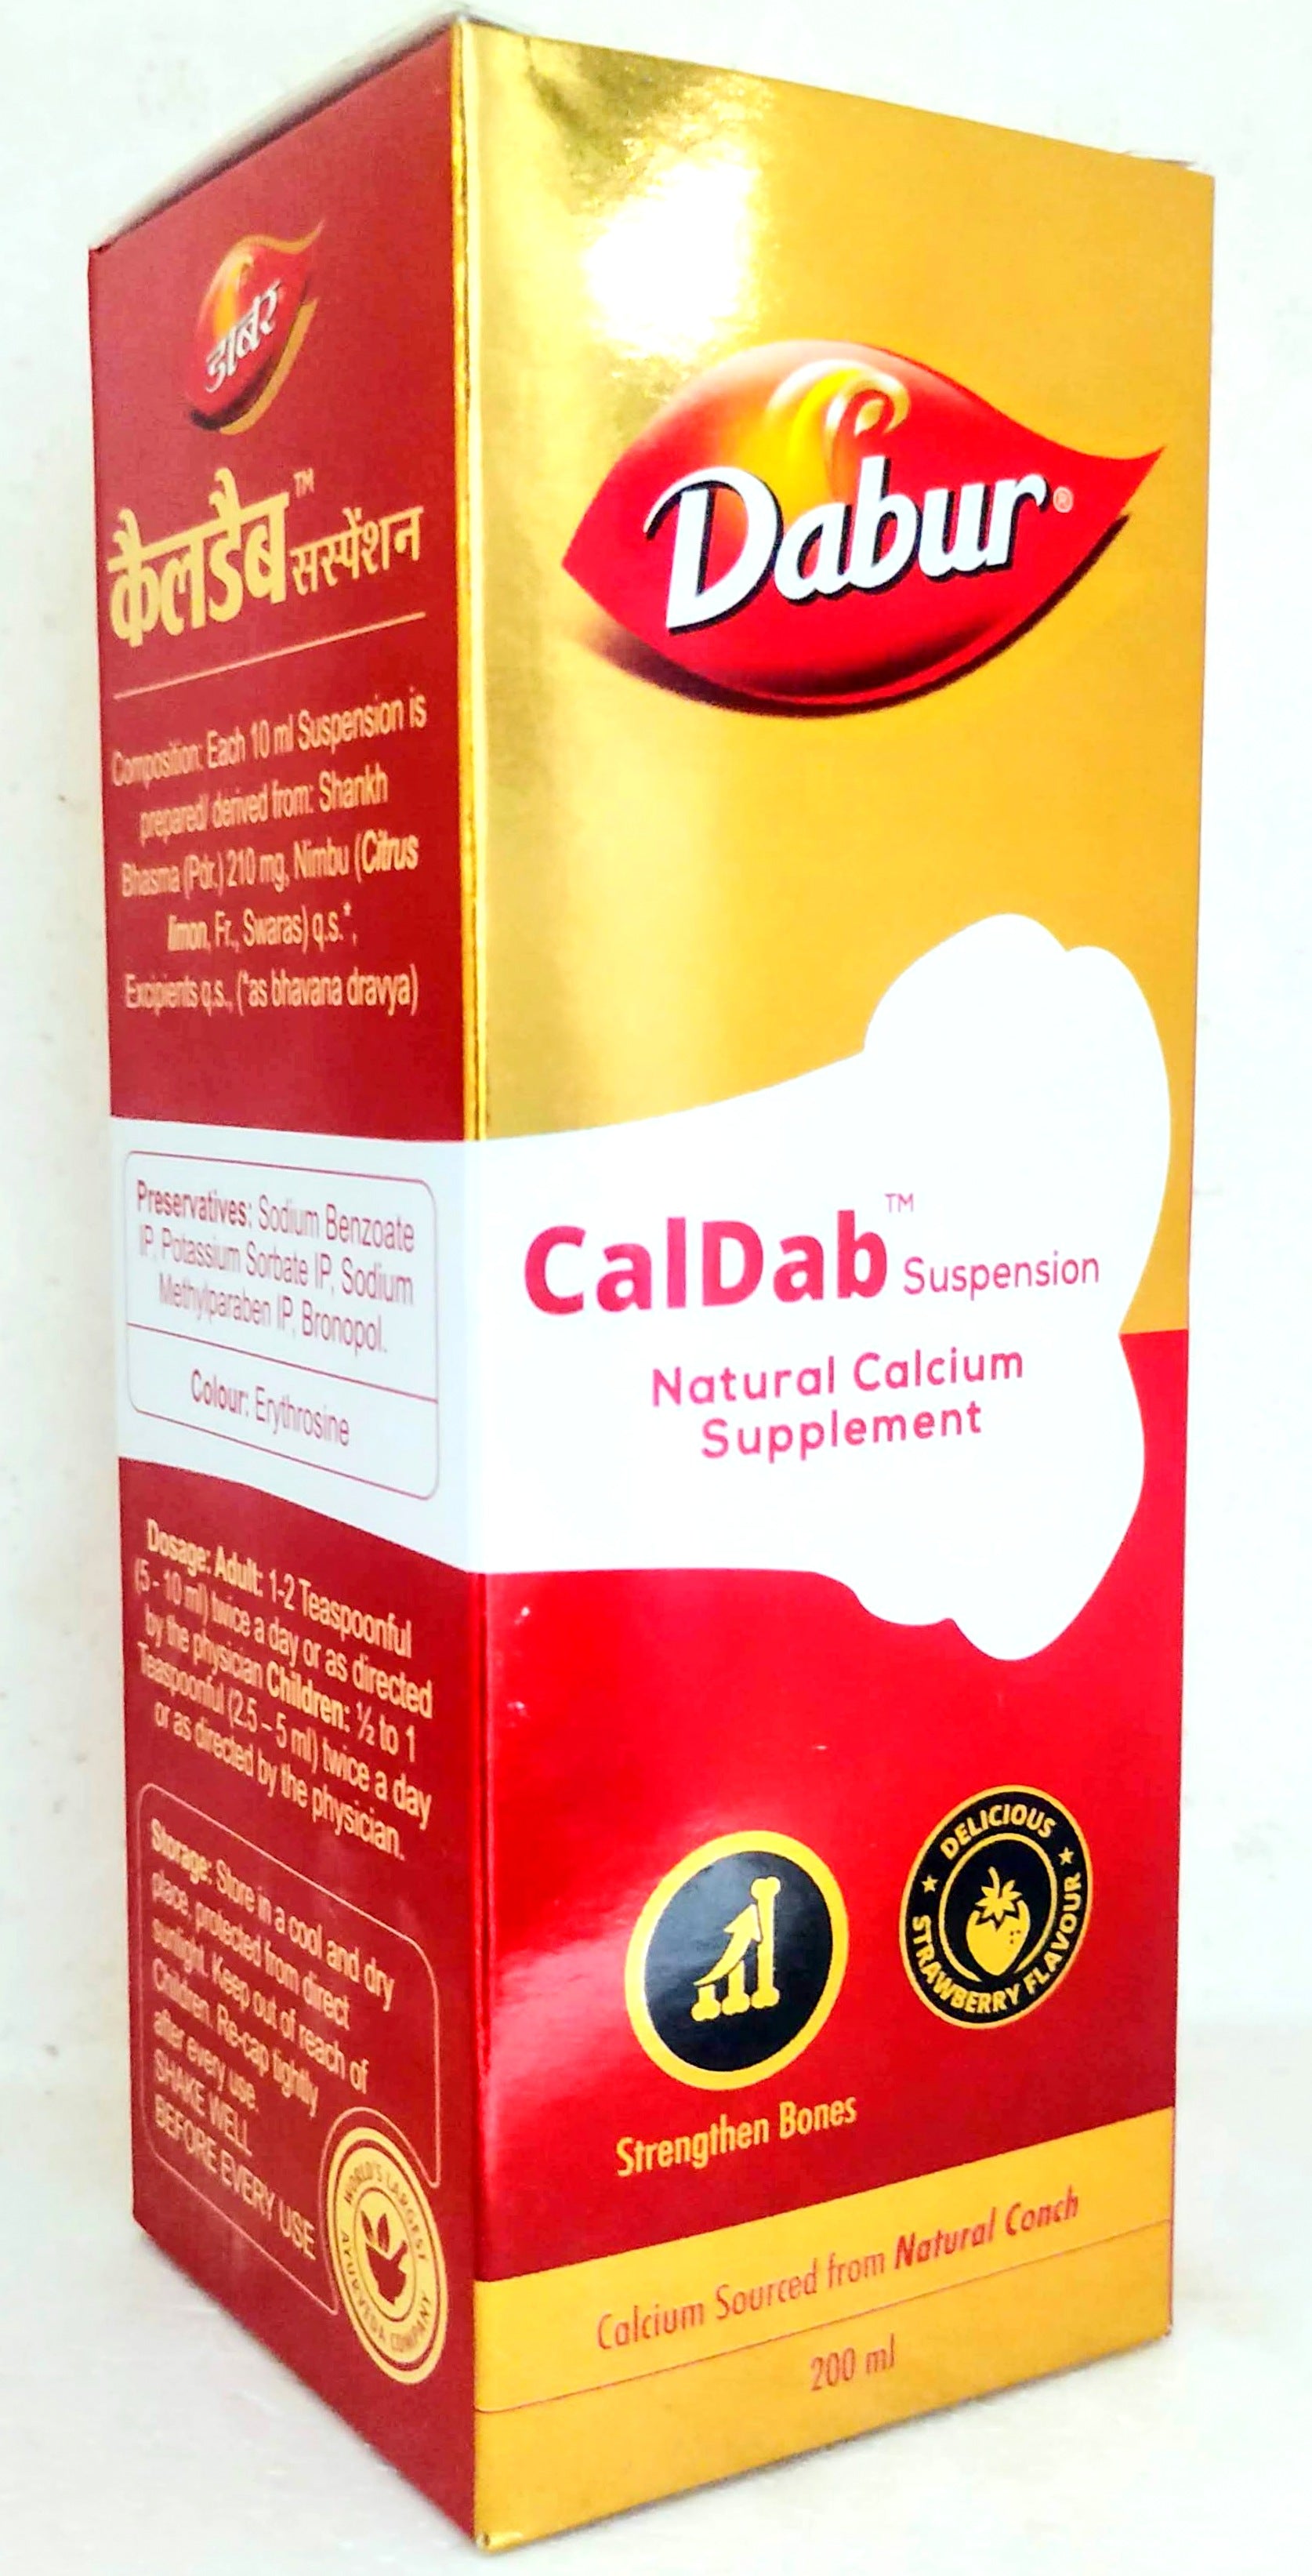 Shop Caldab Syrup 200ml at price 130.00 from Dabur Online - Ayush Care